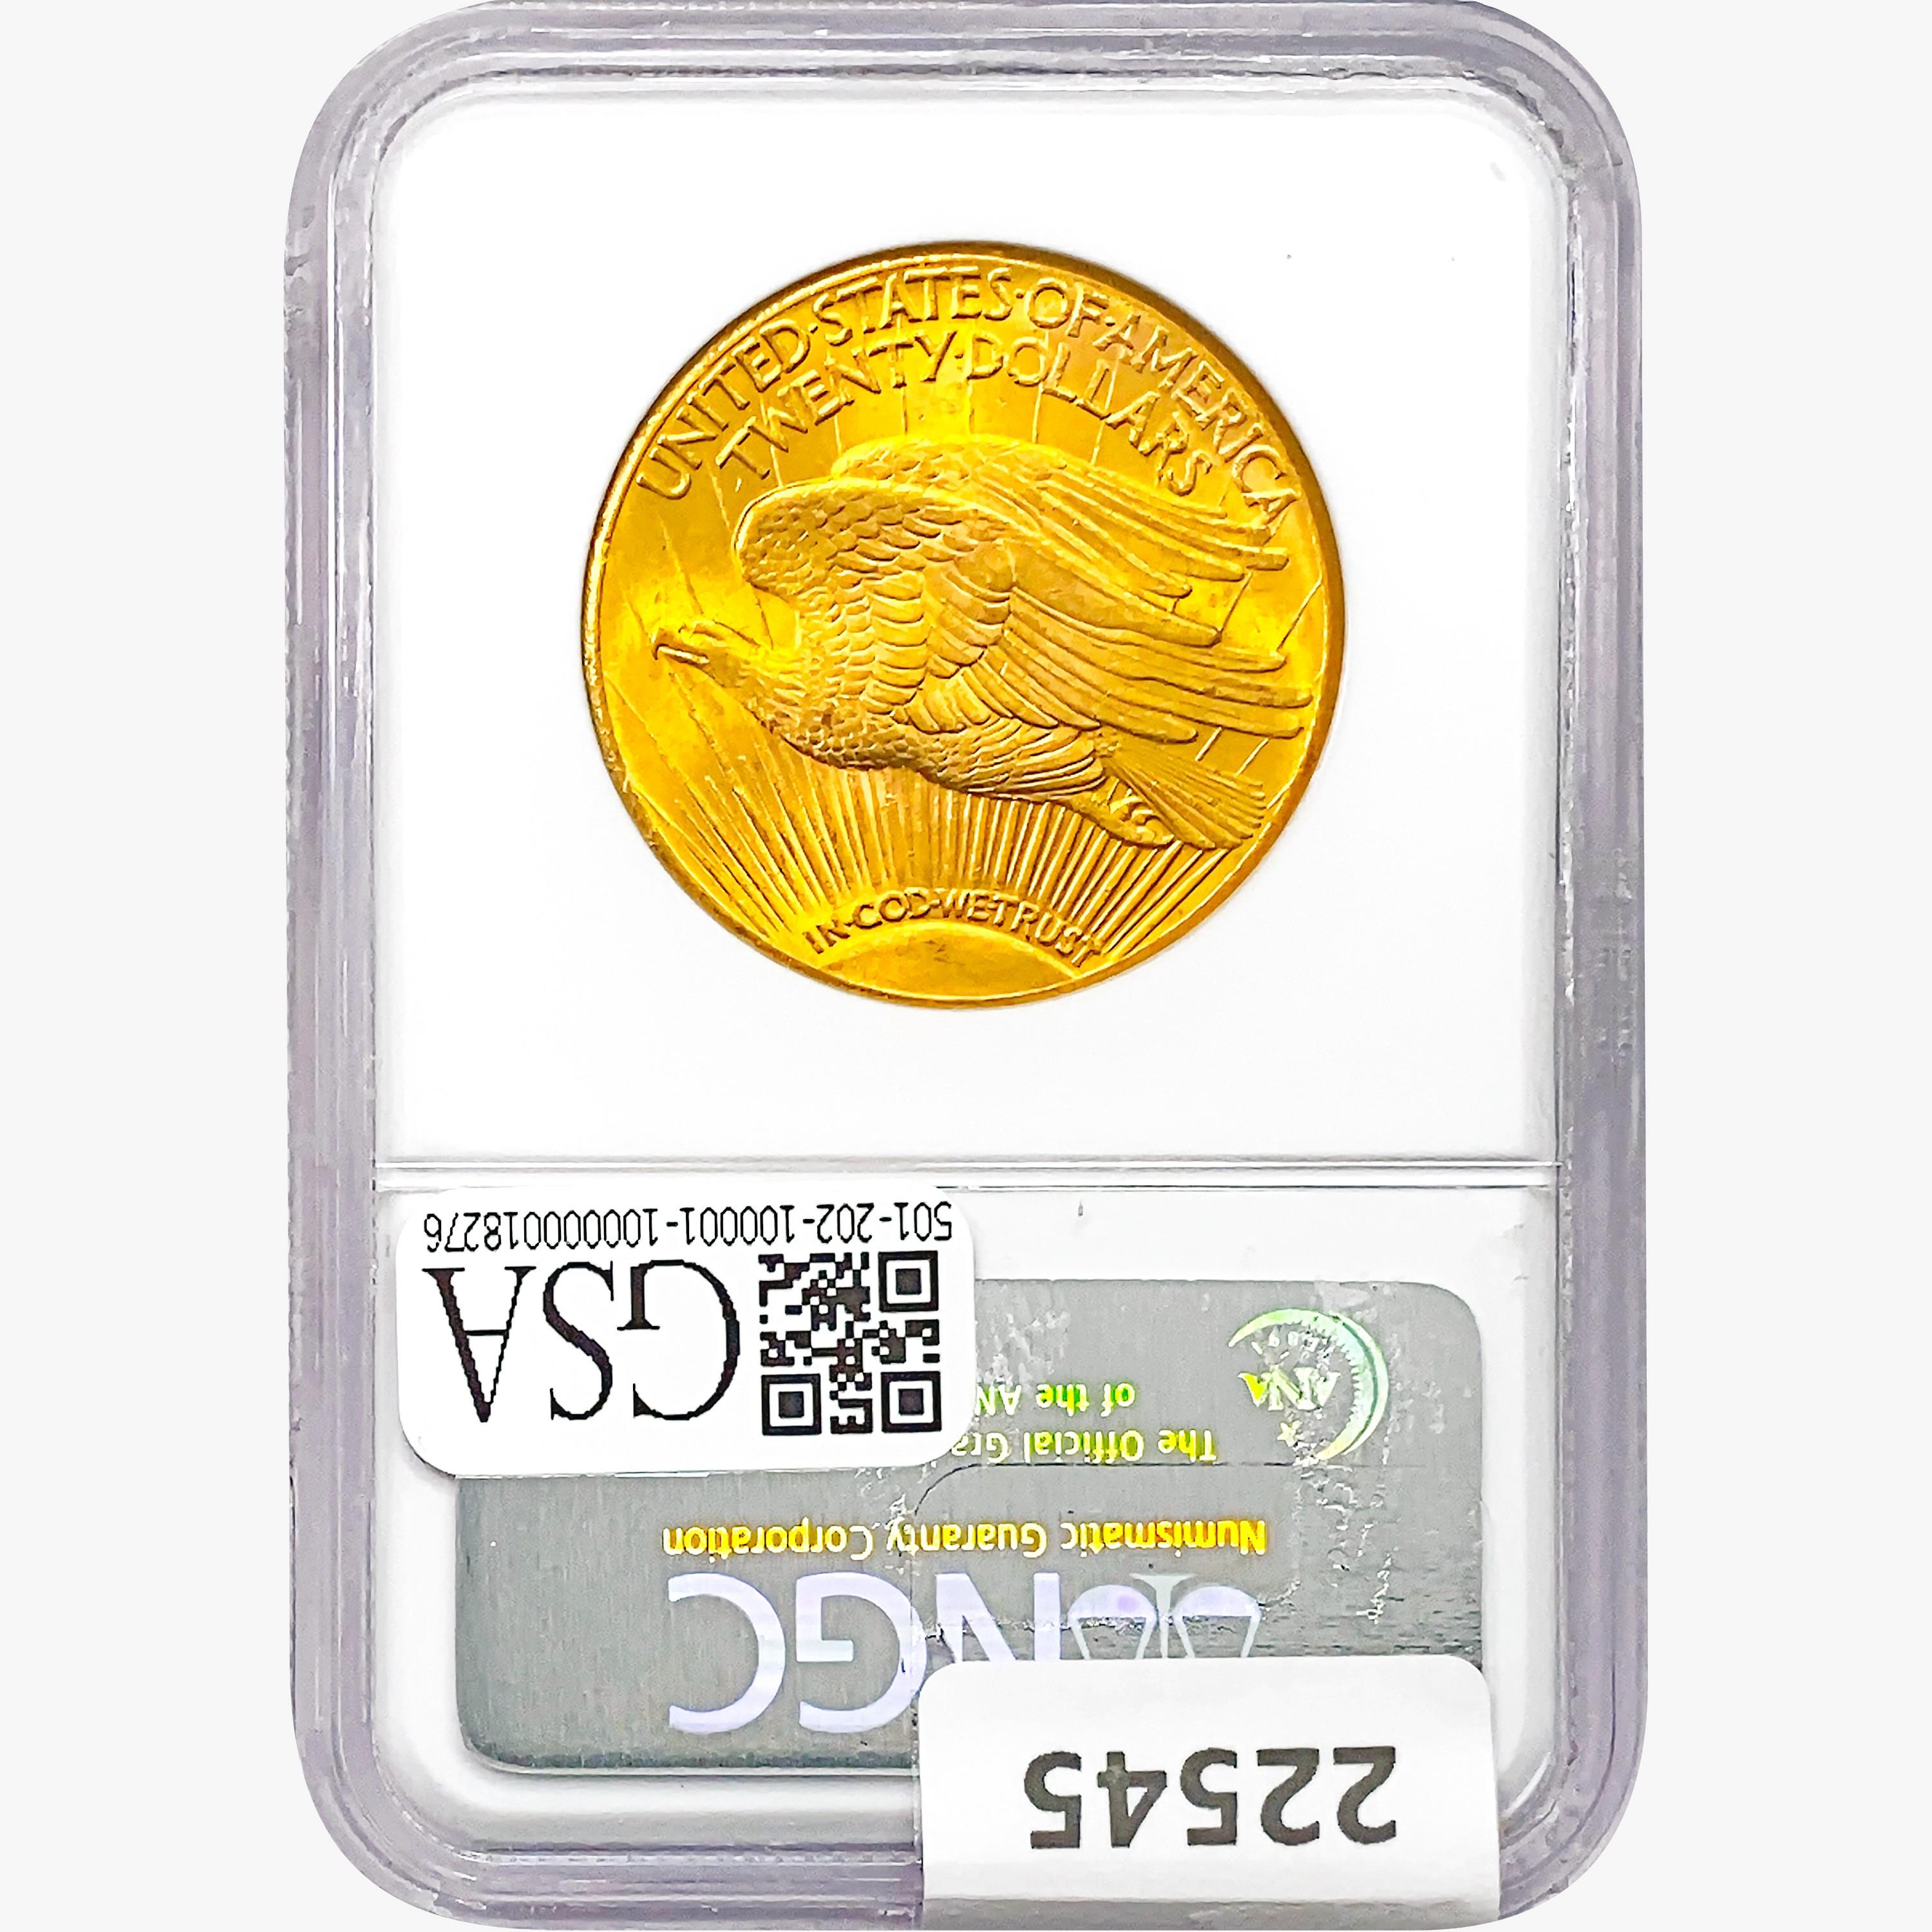 1927 $20 Gold Double Eagle NGC MS62